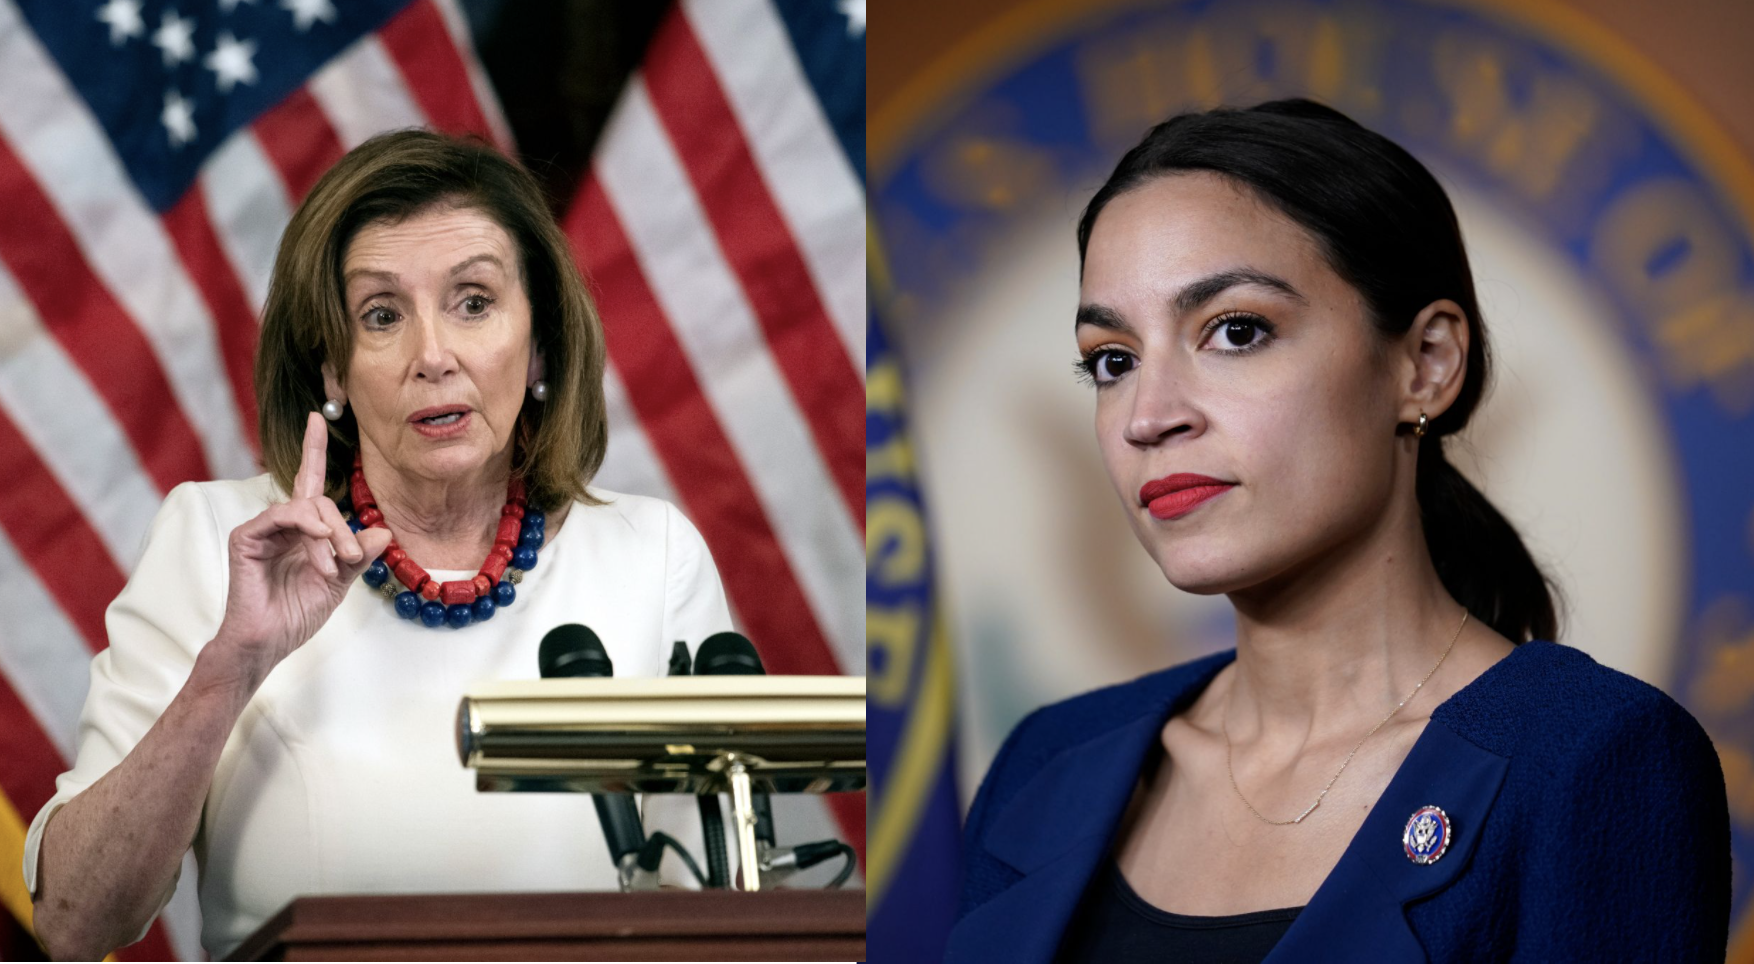 Left: Nancy Pelosi in all white and a red-and-blue beaded necklace; Right: Alexandria Ocasio-Cortez in all blue with red lipstick.